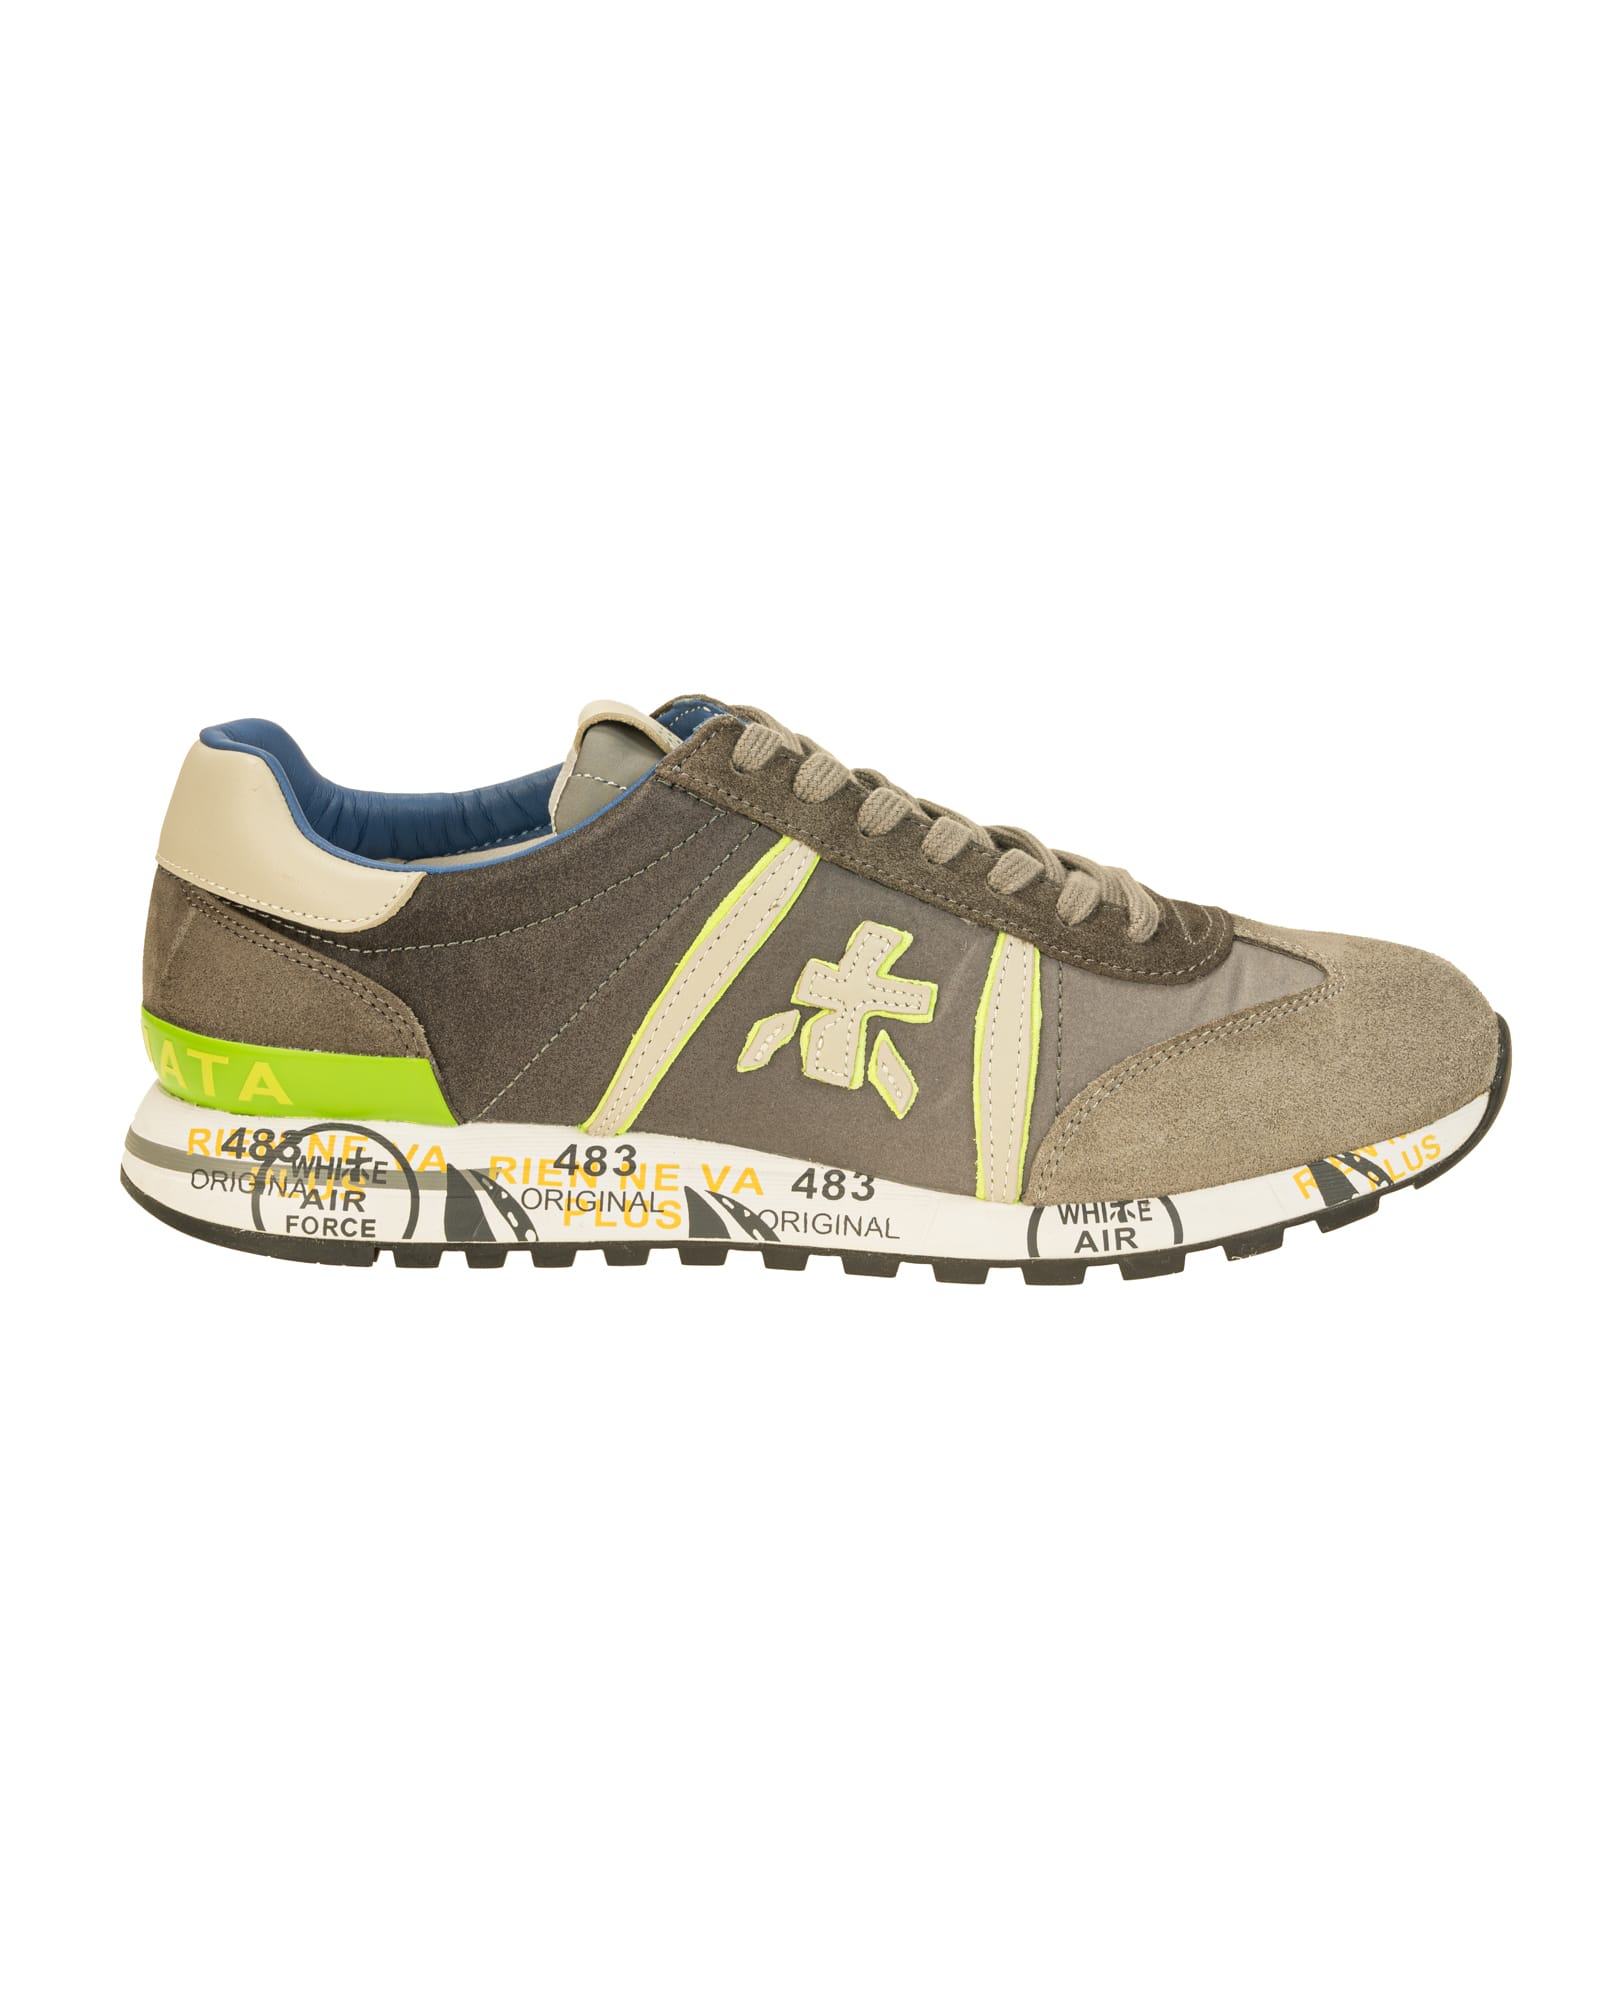 Premiata Lucy iconic sneakers of the family